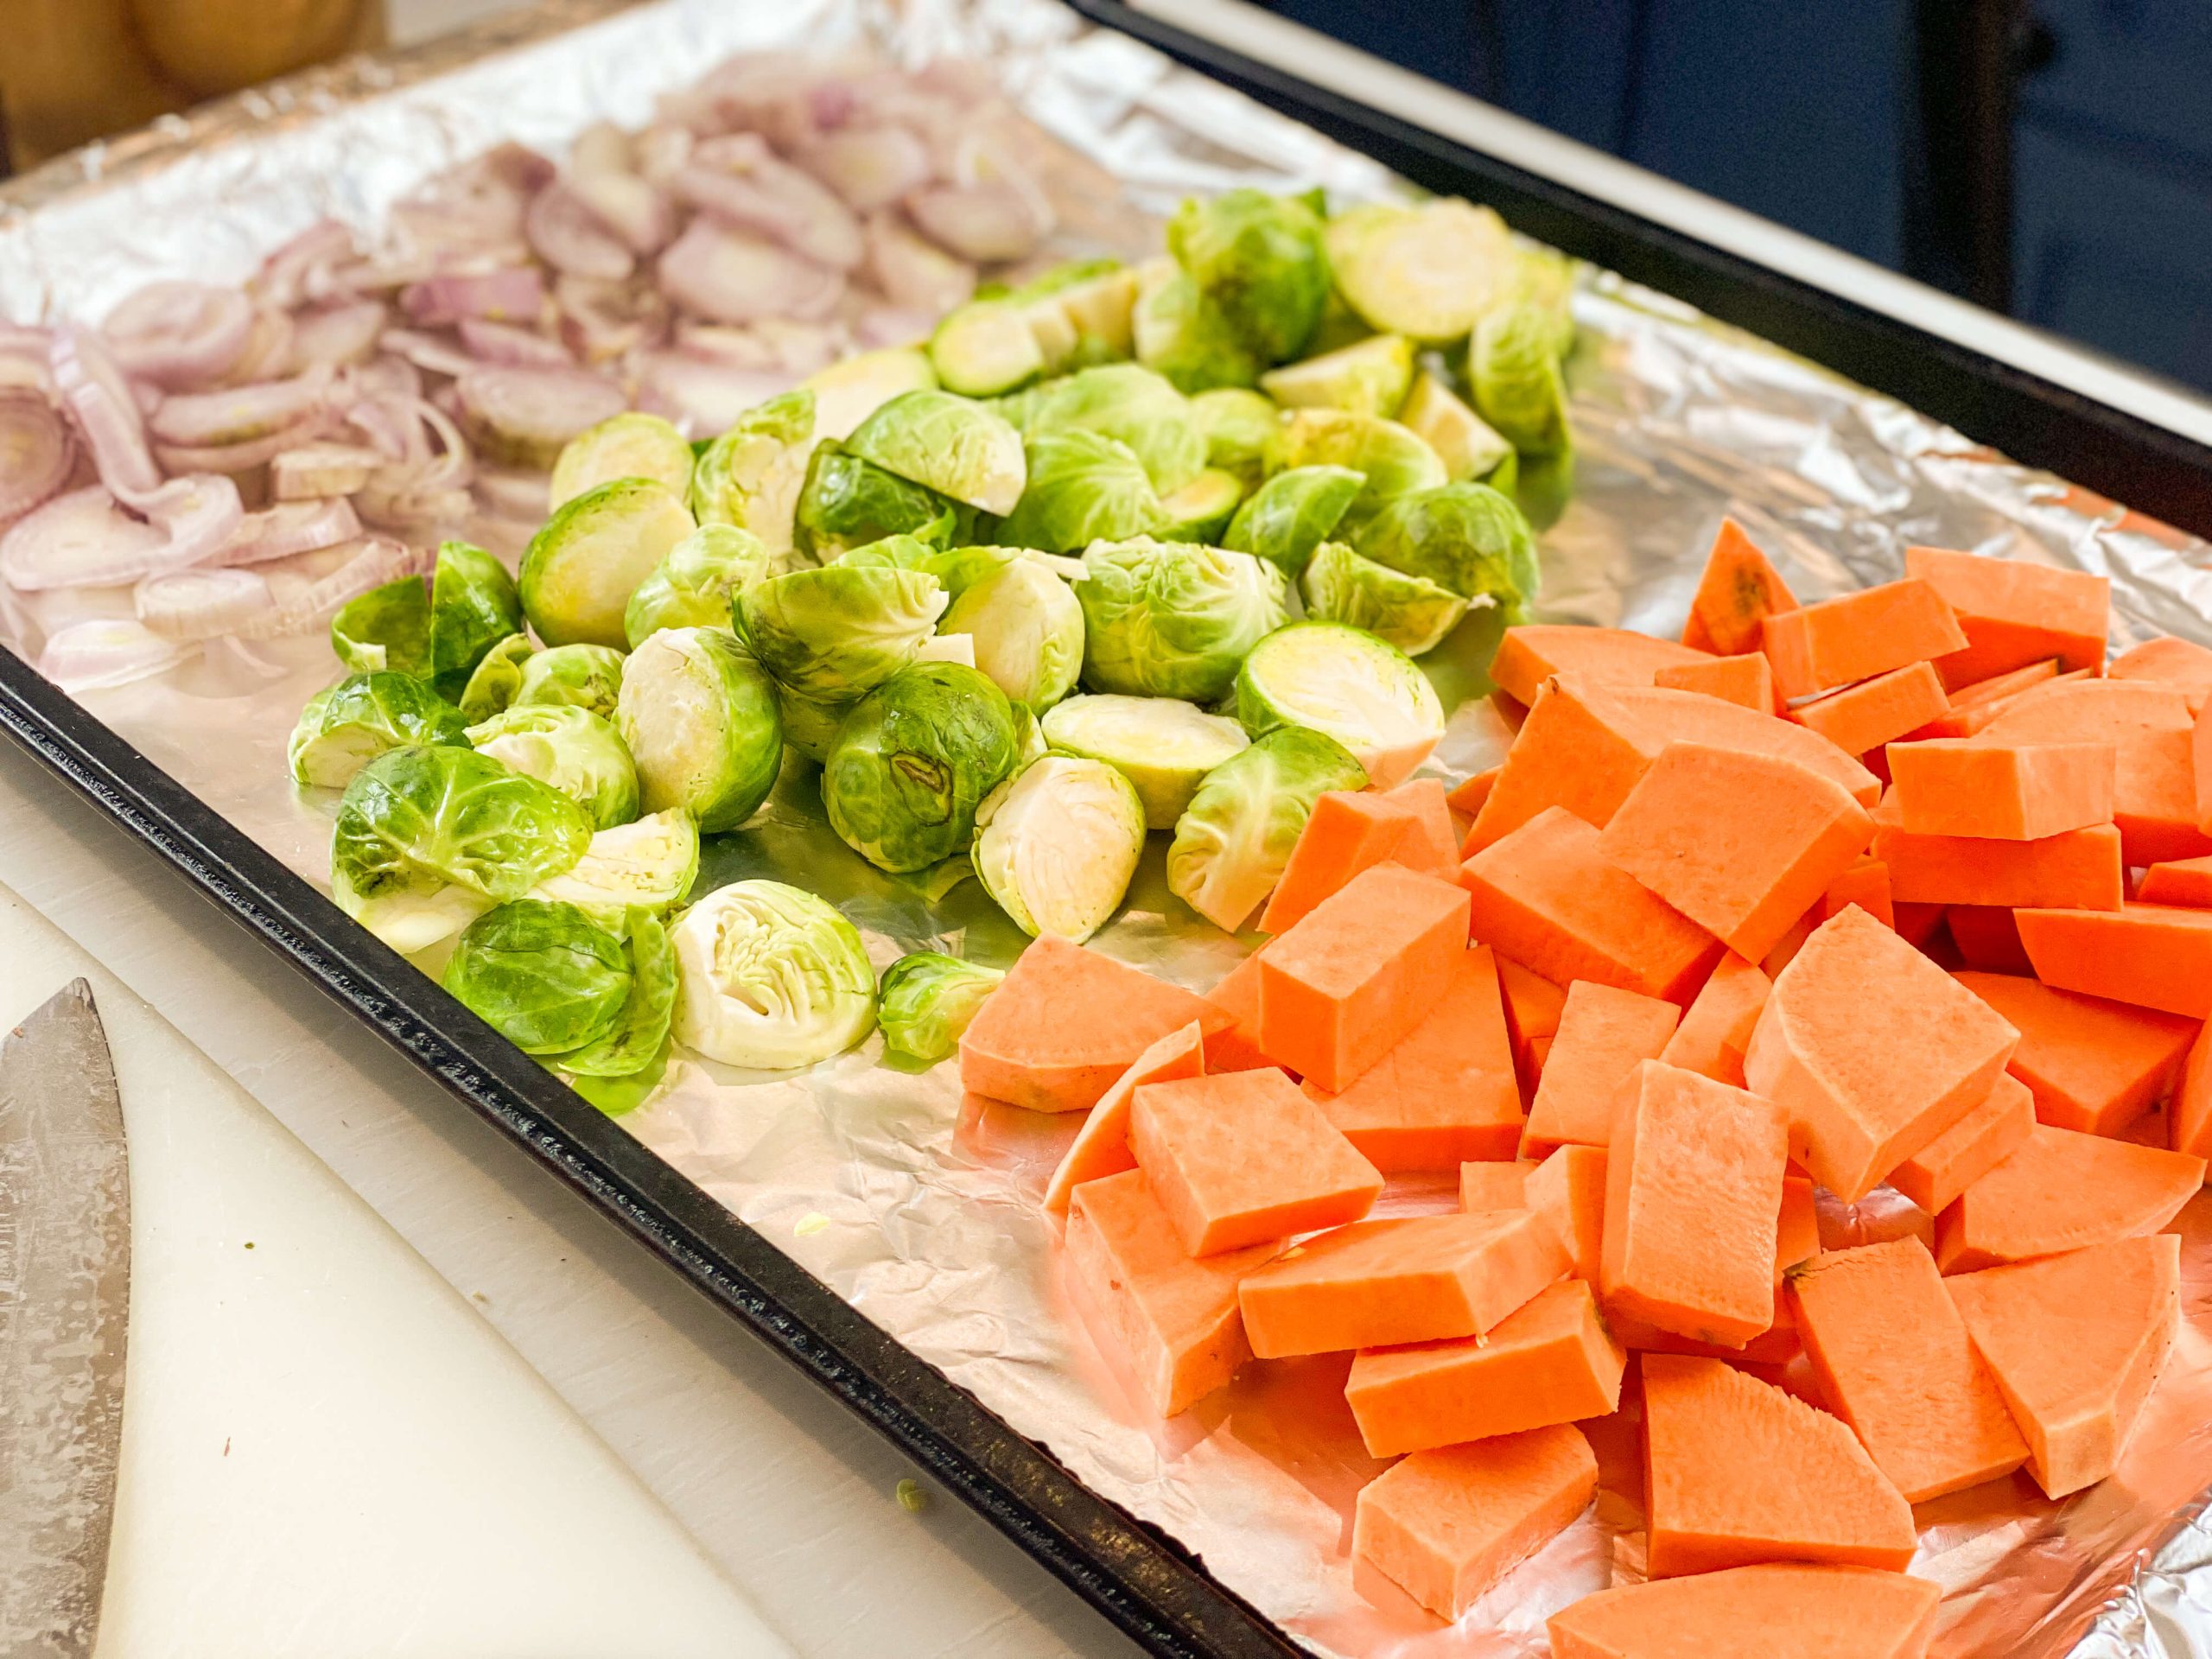 vegetables cut and lined up on baking sheet